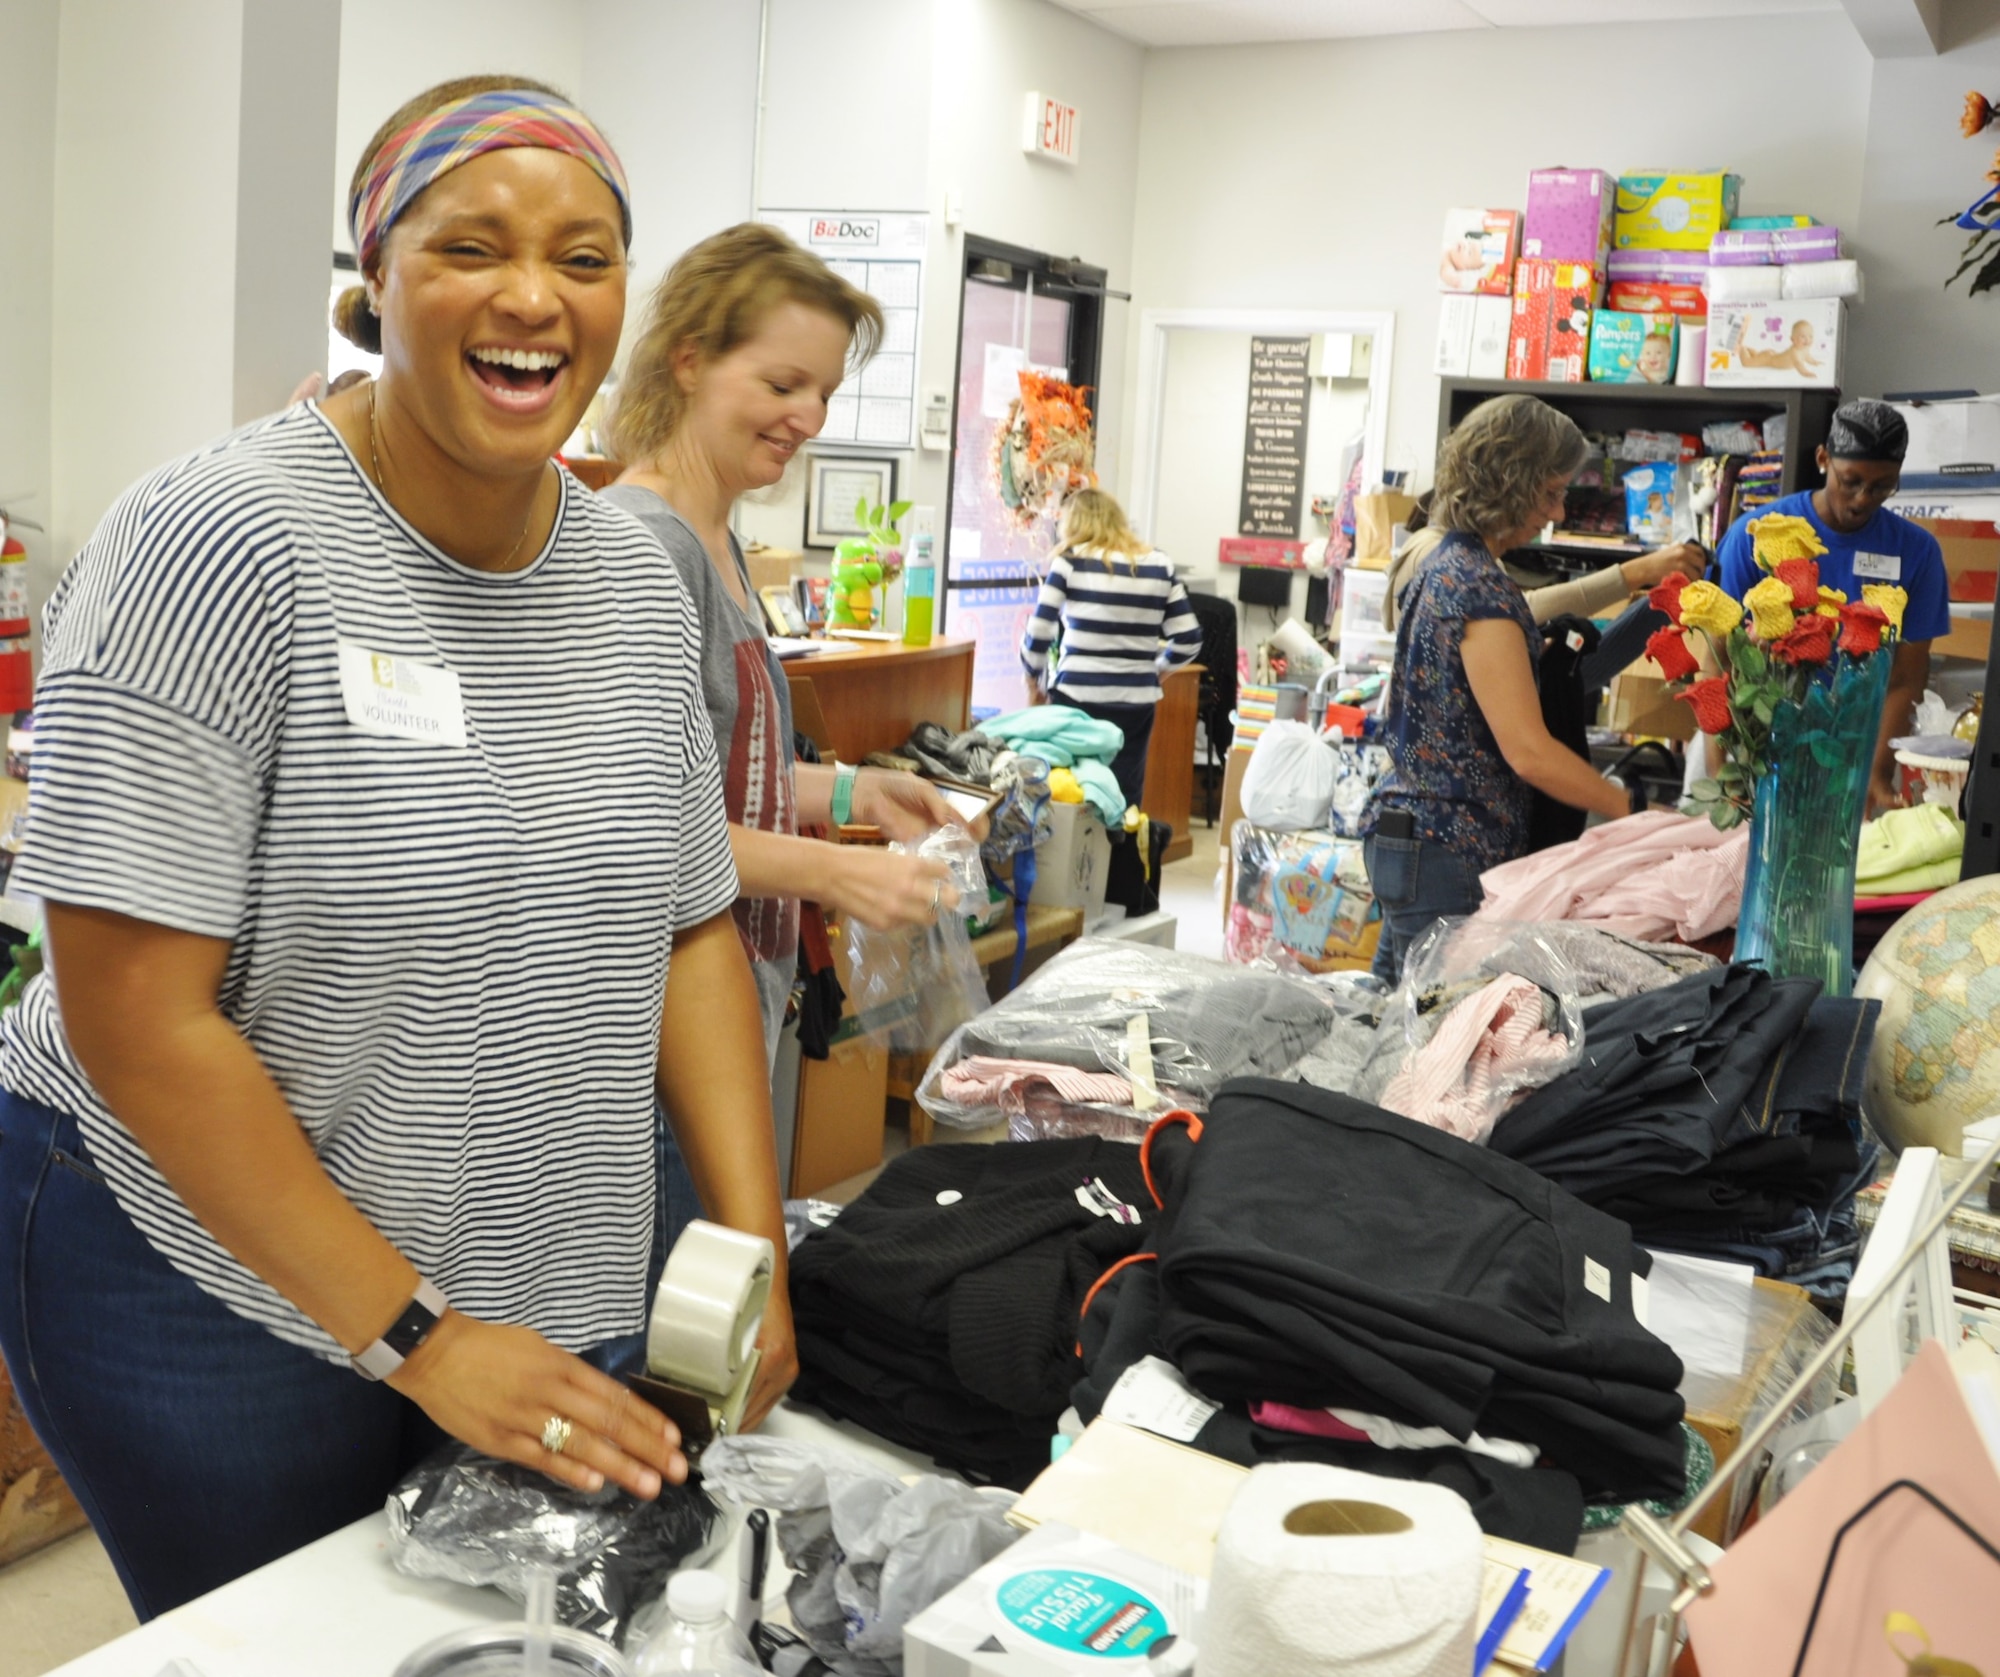 Capt. Yolanda Seals (left) shares a chuckle with fellow 340th Flying Training Group volunteers (left to right) Chastity Ramirez Lt. Col. Teresa Davies and Master Sgt. Faith Wells during the Sept. 11 community outreach event at the San Antonio, Texas Family Violence Prevention Services/Battered Women and Children’s Shelter’s Donation Center. Donation Center Coordinator Mari Ayala Sandoval (background-striped top) opens the door to accept waiting donations. (U.S. Air Force photo by Janis El Shabazz)